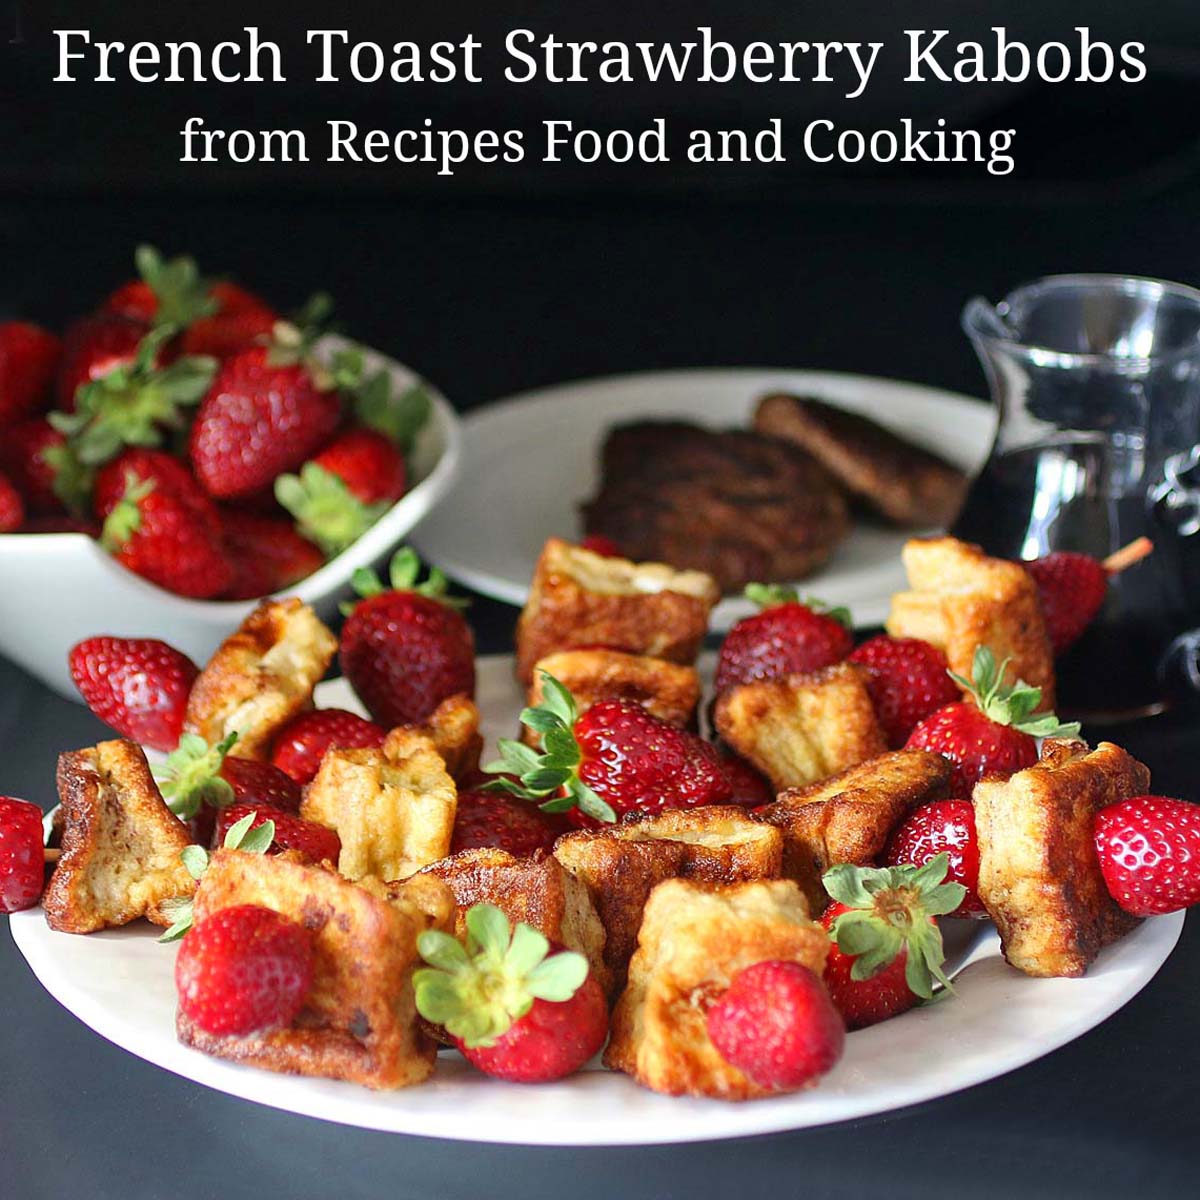 French Toast Strawberry Kabobs